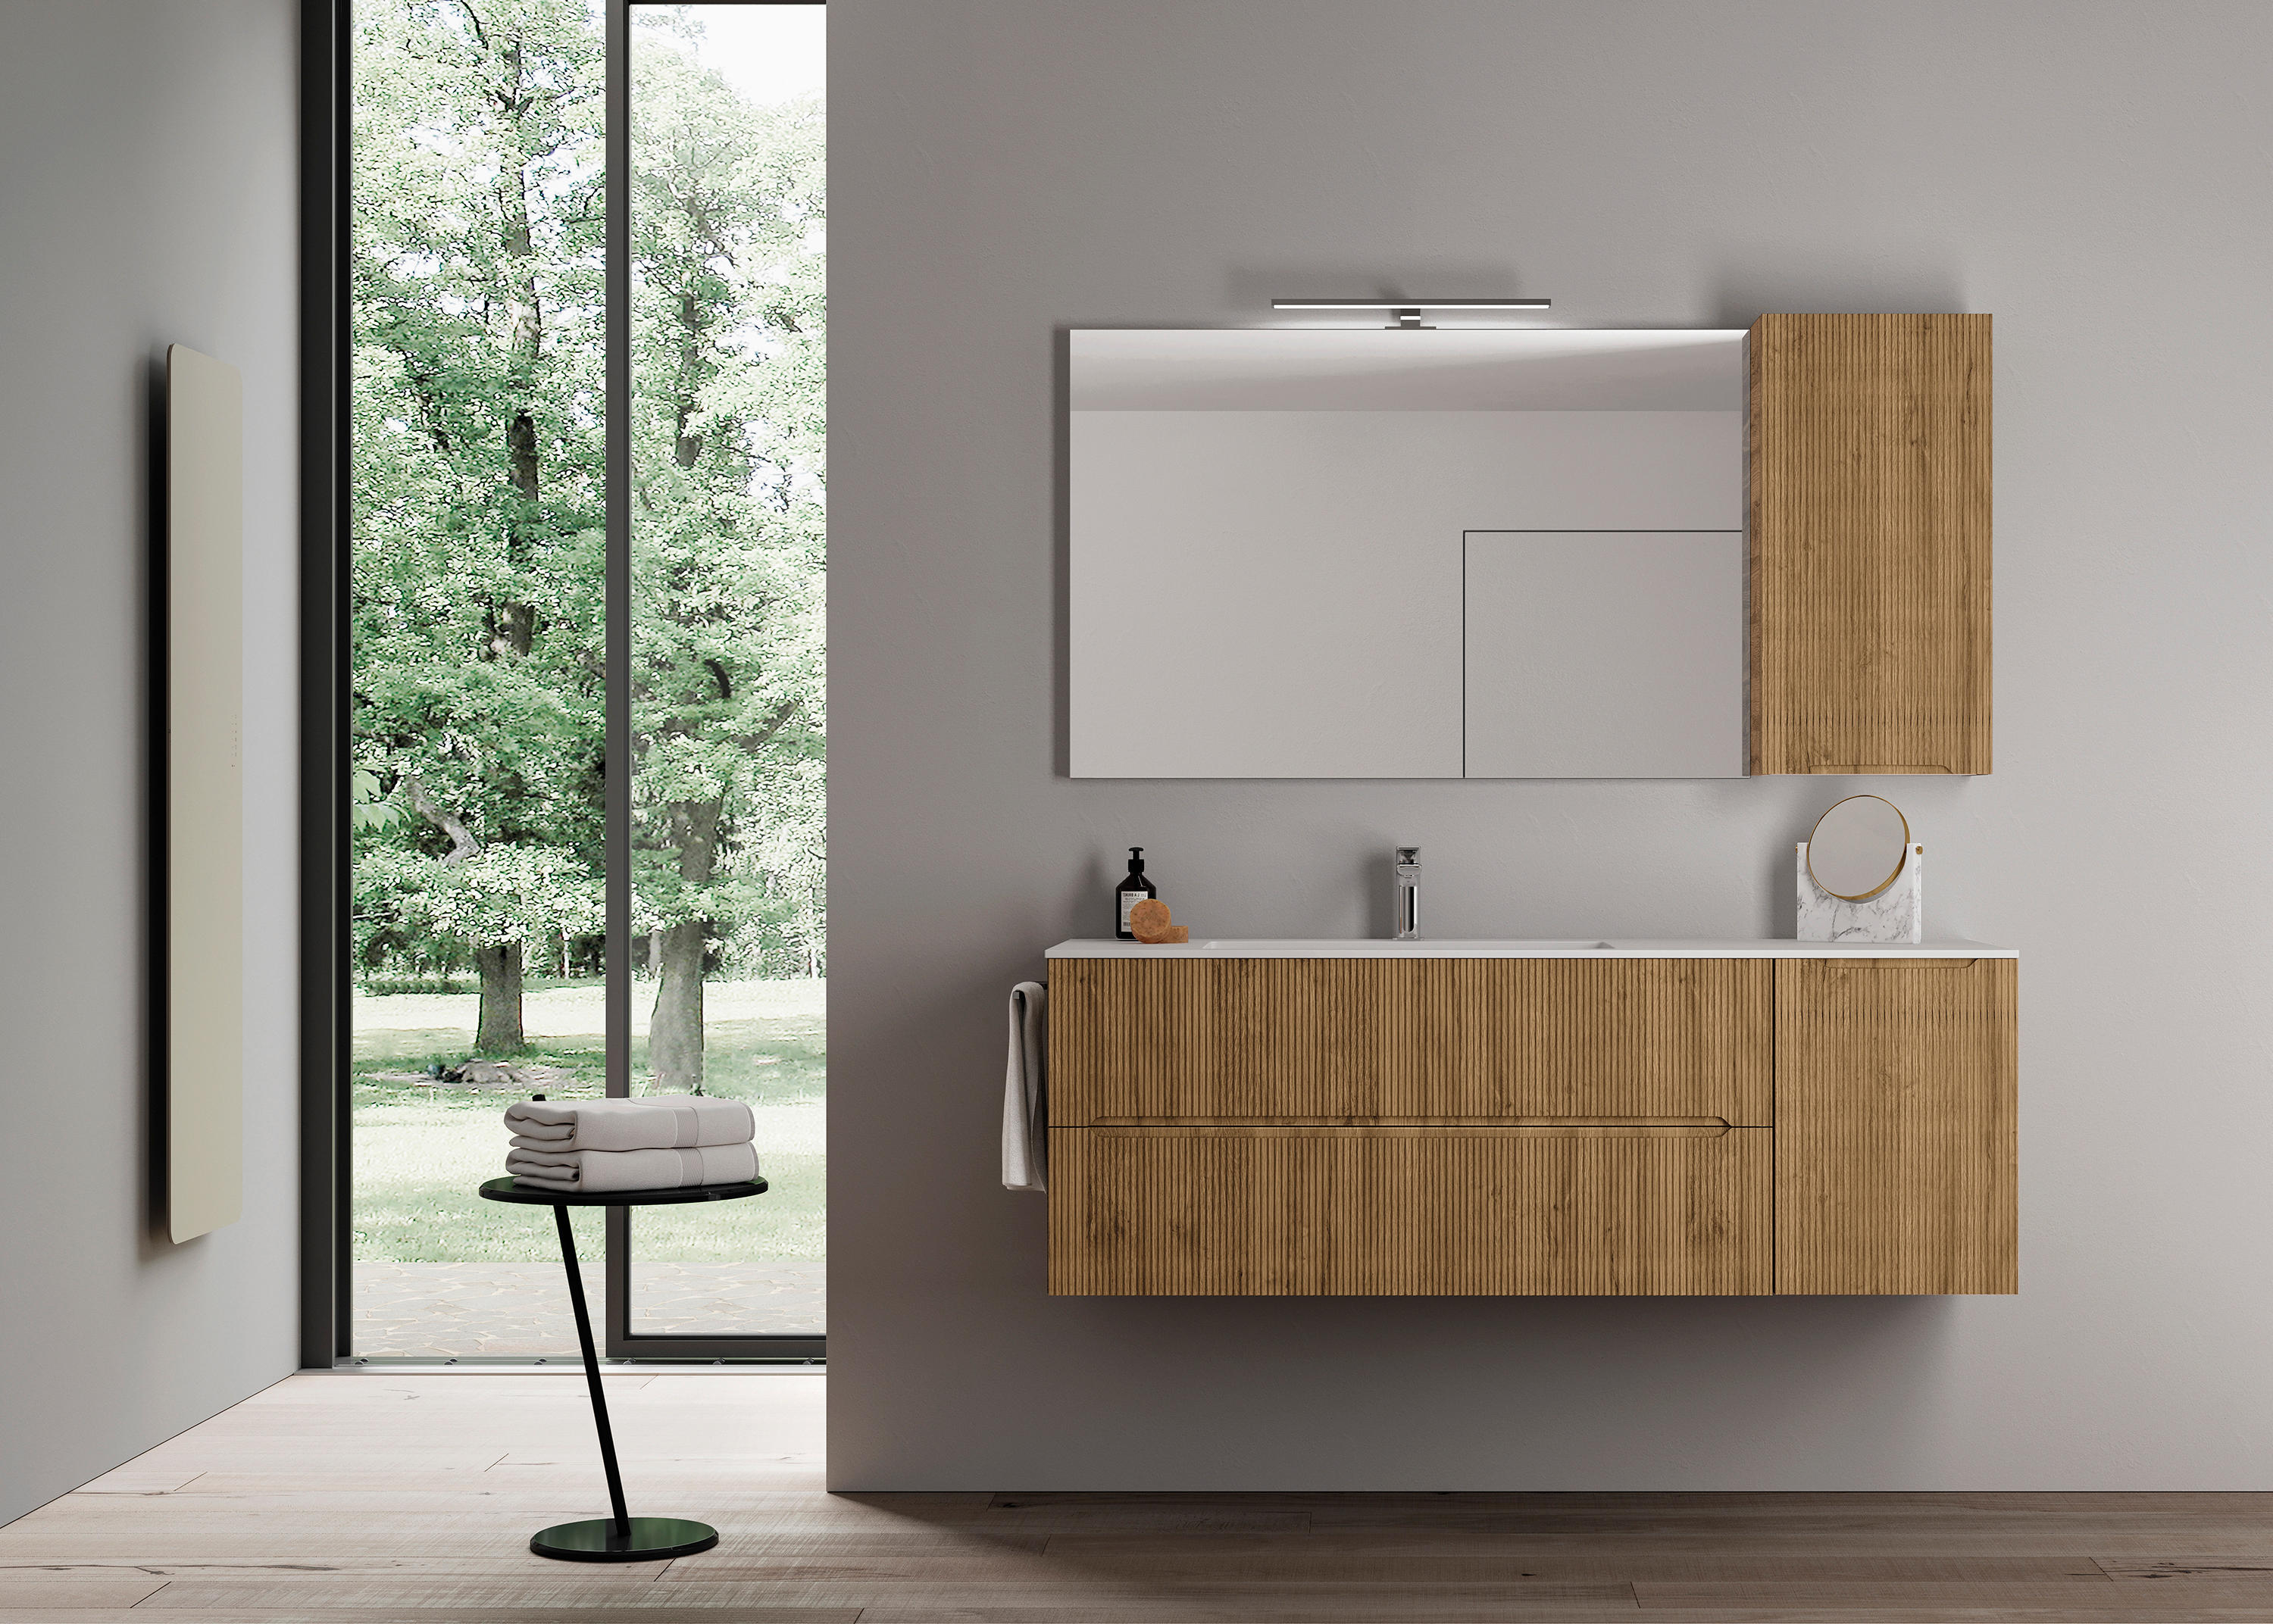 SMYLE 01 - Mirror cabinets from Ideagroup | Architonic